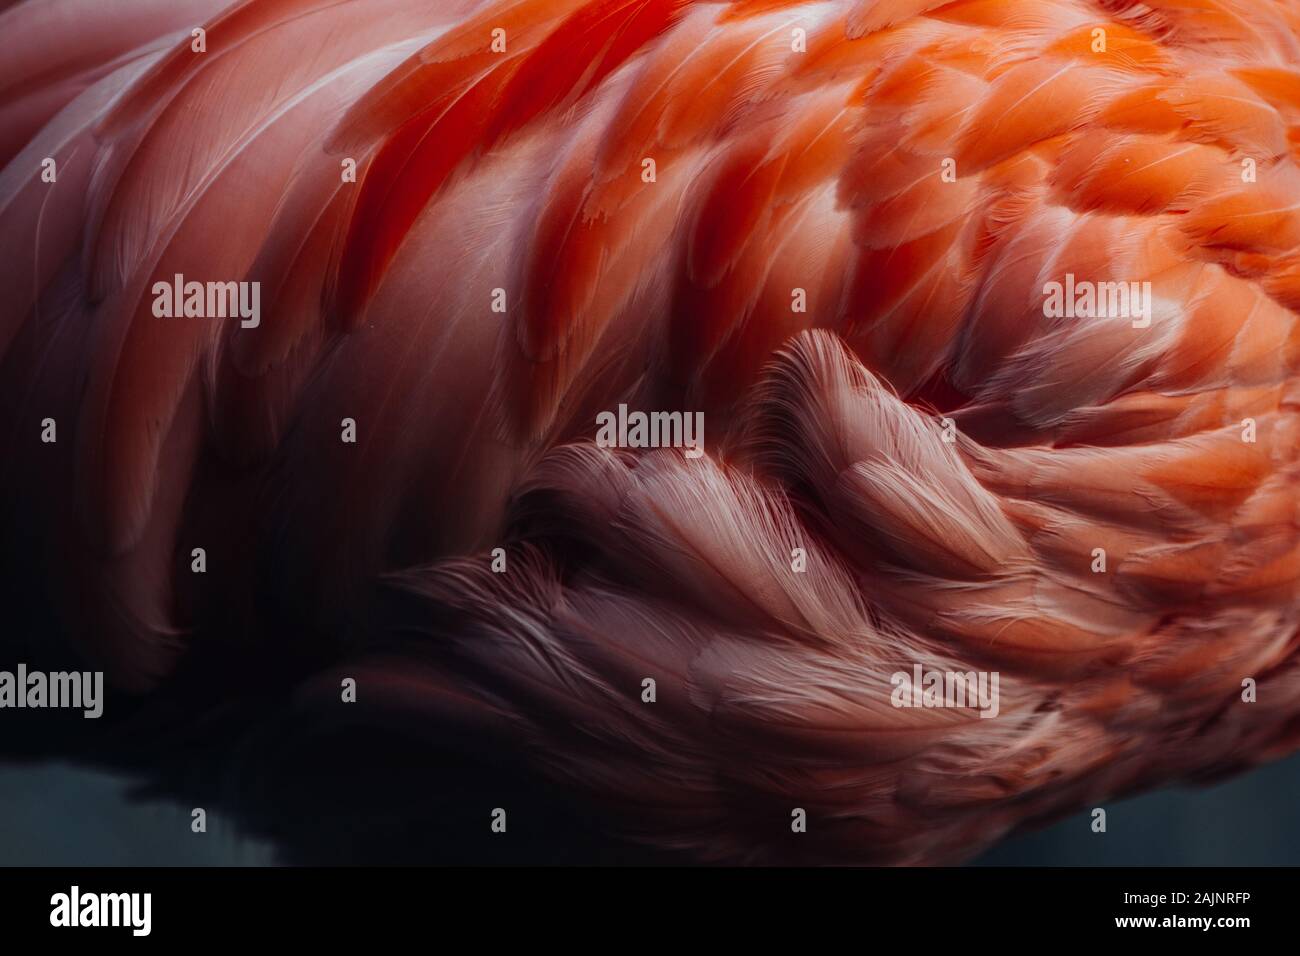 Beautiful close-up of the feathers of a pink flamingo bird. Creative background. Stock Photo